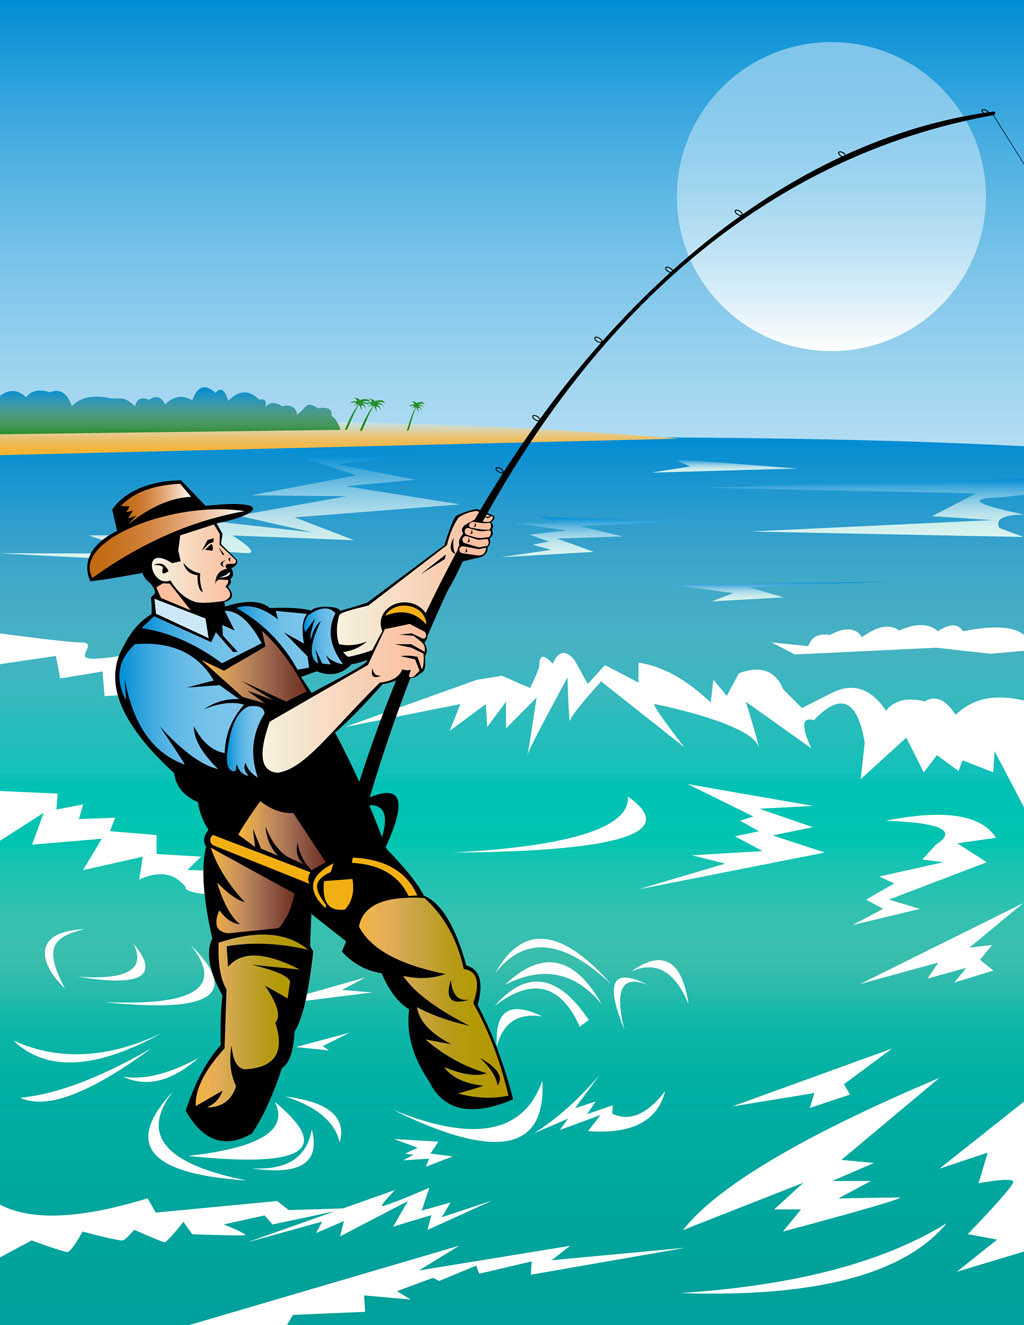 https://www.freevector.com/uploads/vector/preview/11197/FreeVector-Fishing-Man-Poster.jpg